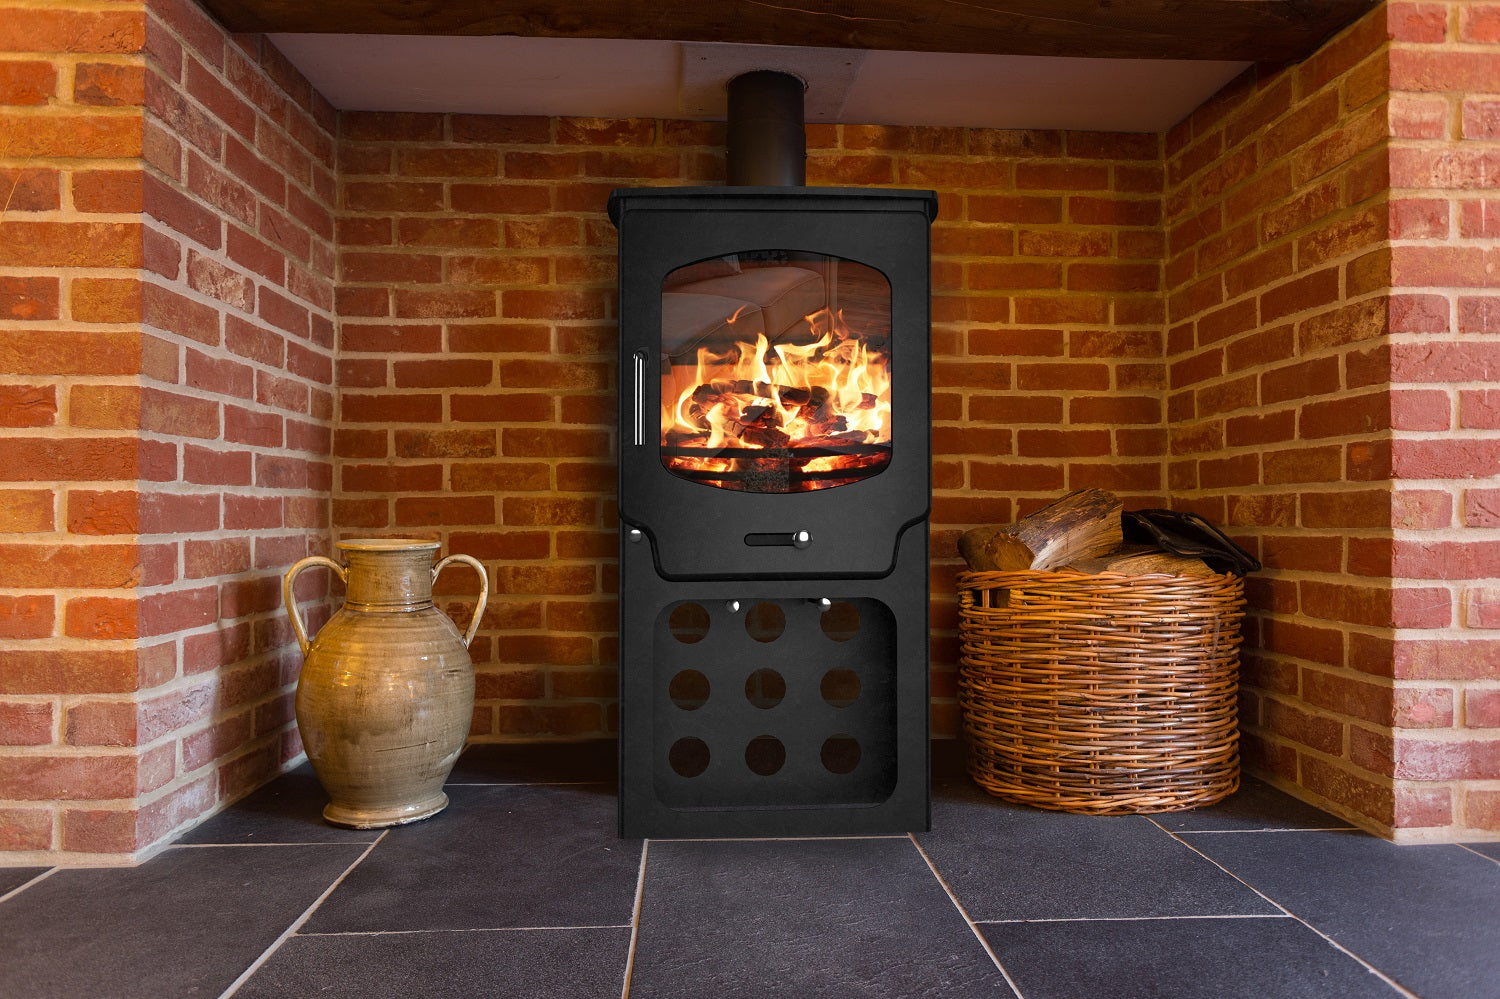 The ST-X5 transforms any fireplace with it's stylish form and handy log store.